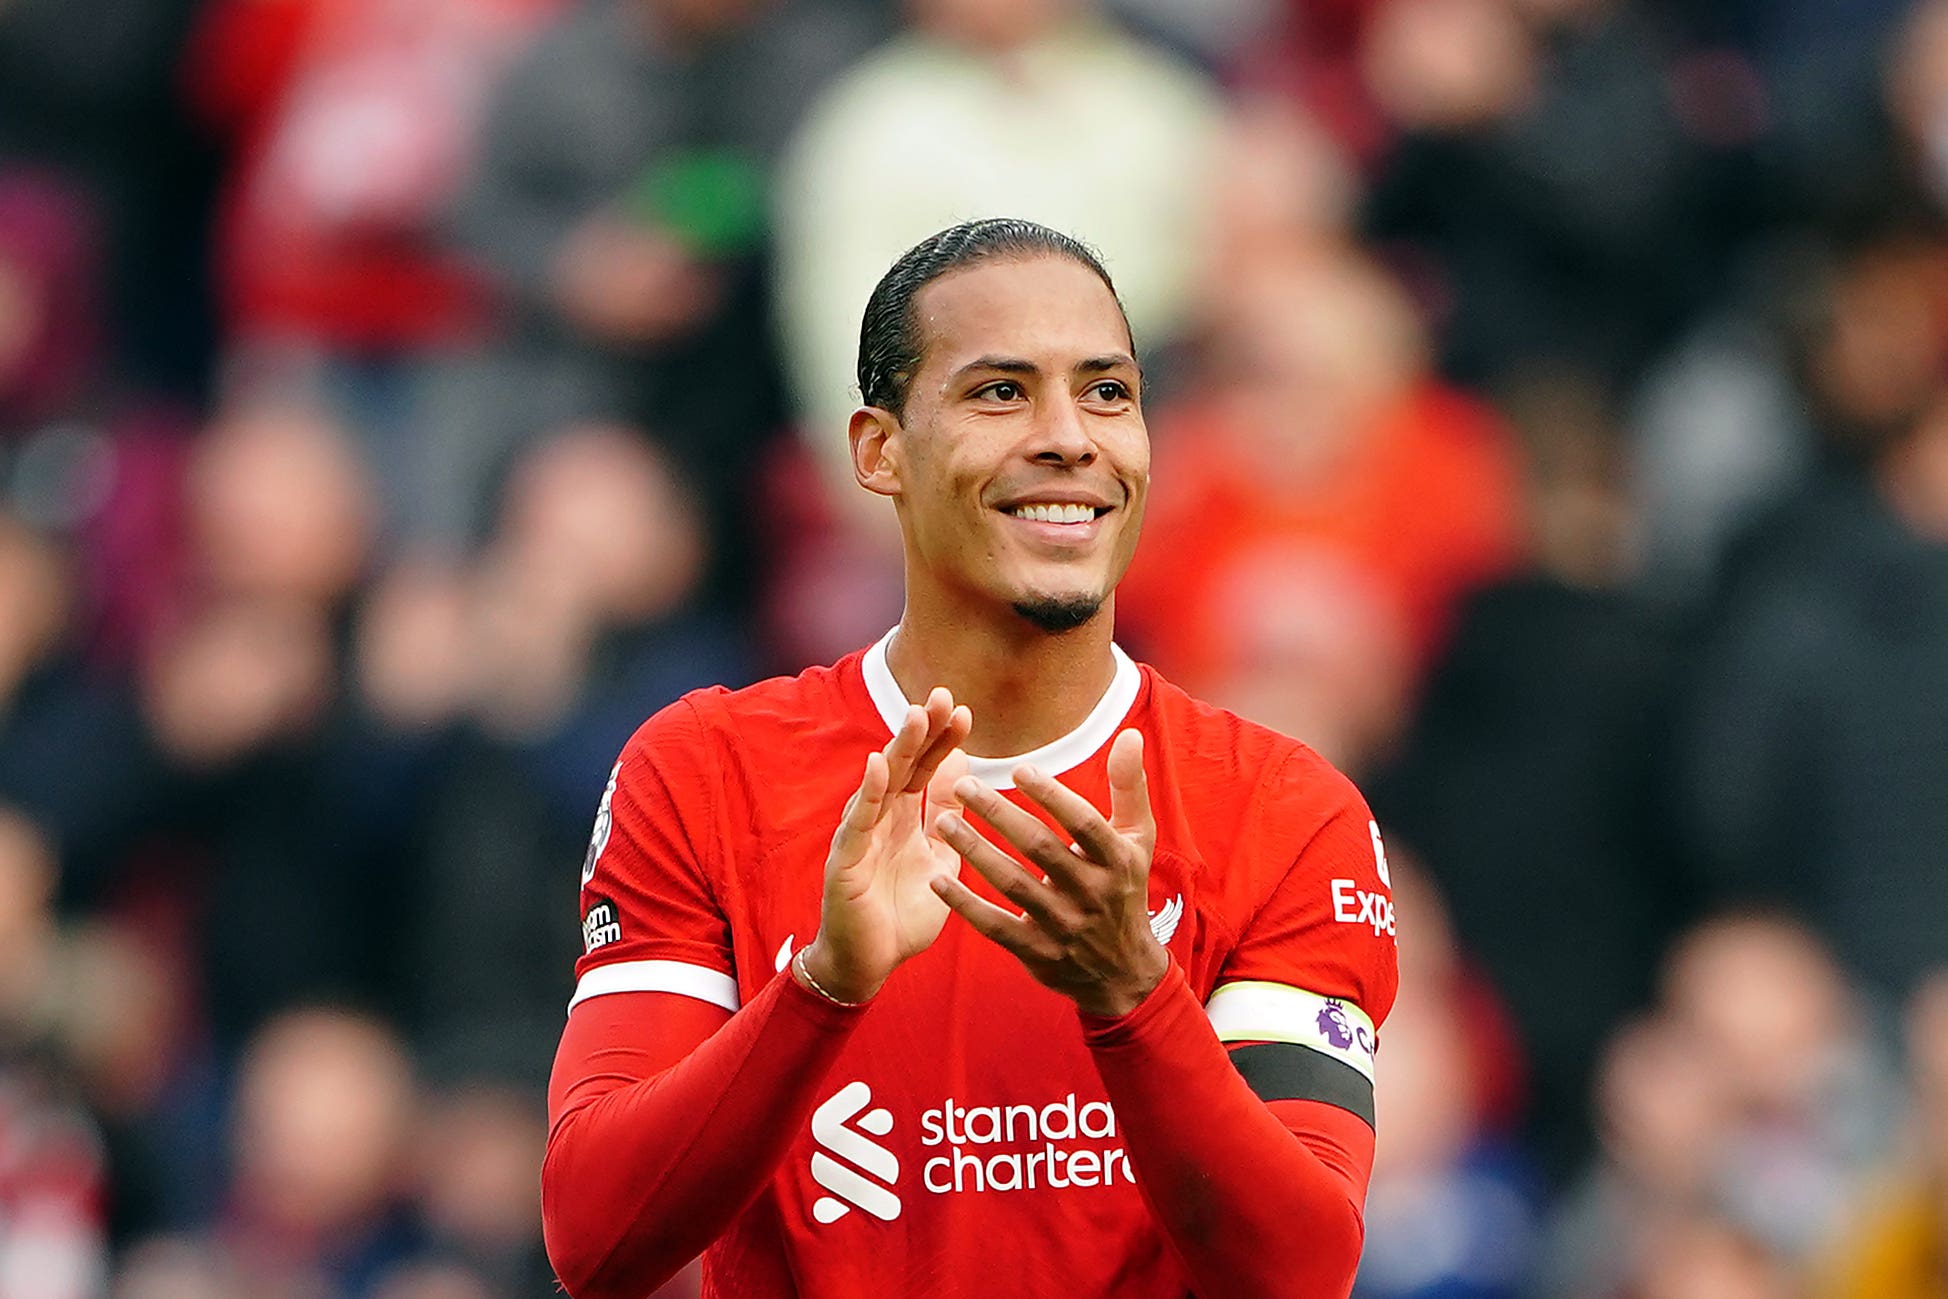 Former Liverpool captain Sami Hyypia believes Virgil van Dijk will prove he is the best centre-back in the Premier League again this season (Peter Byrne/PA)